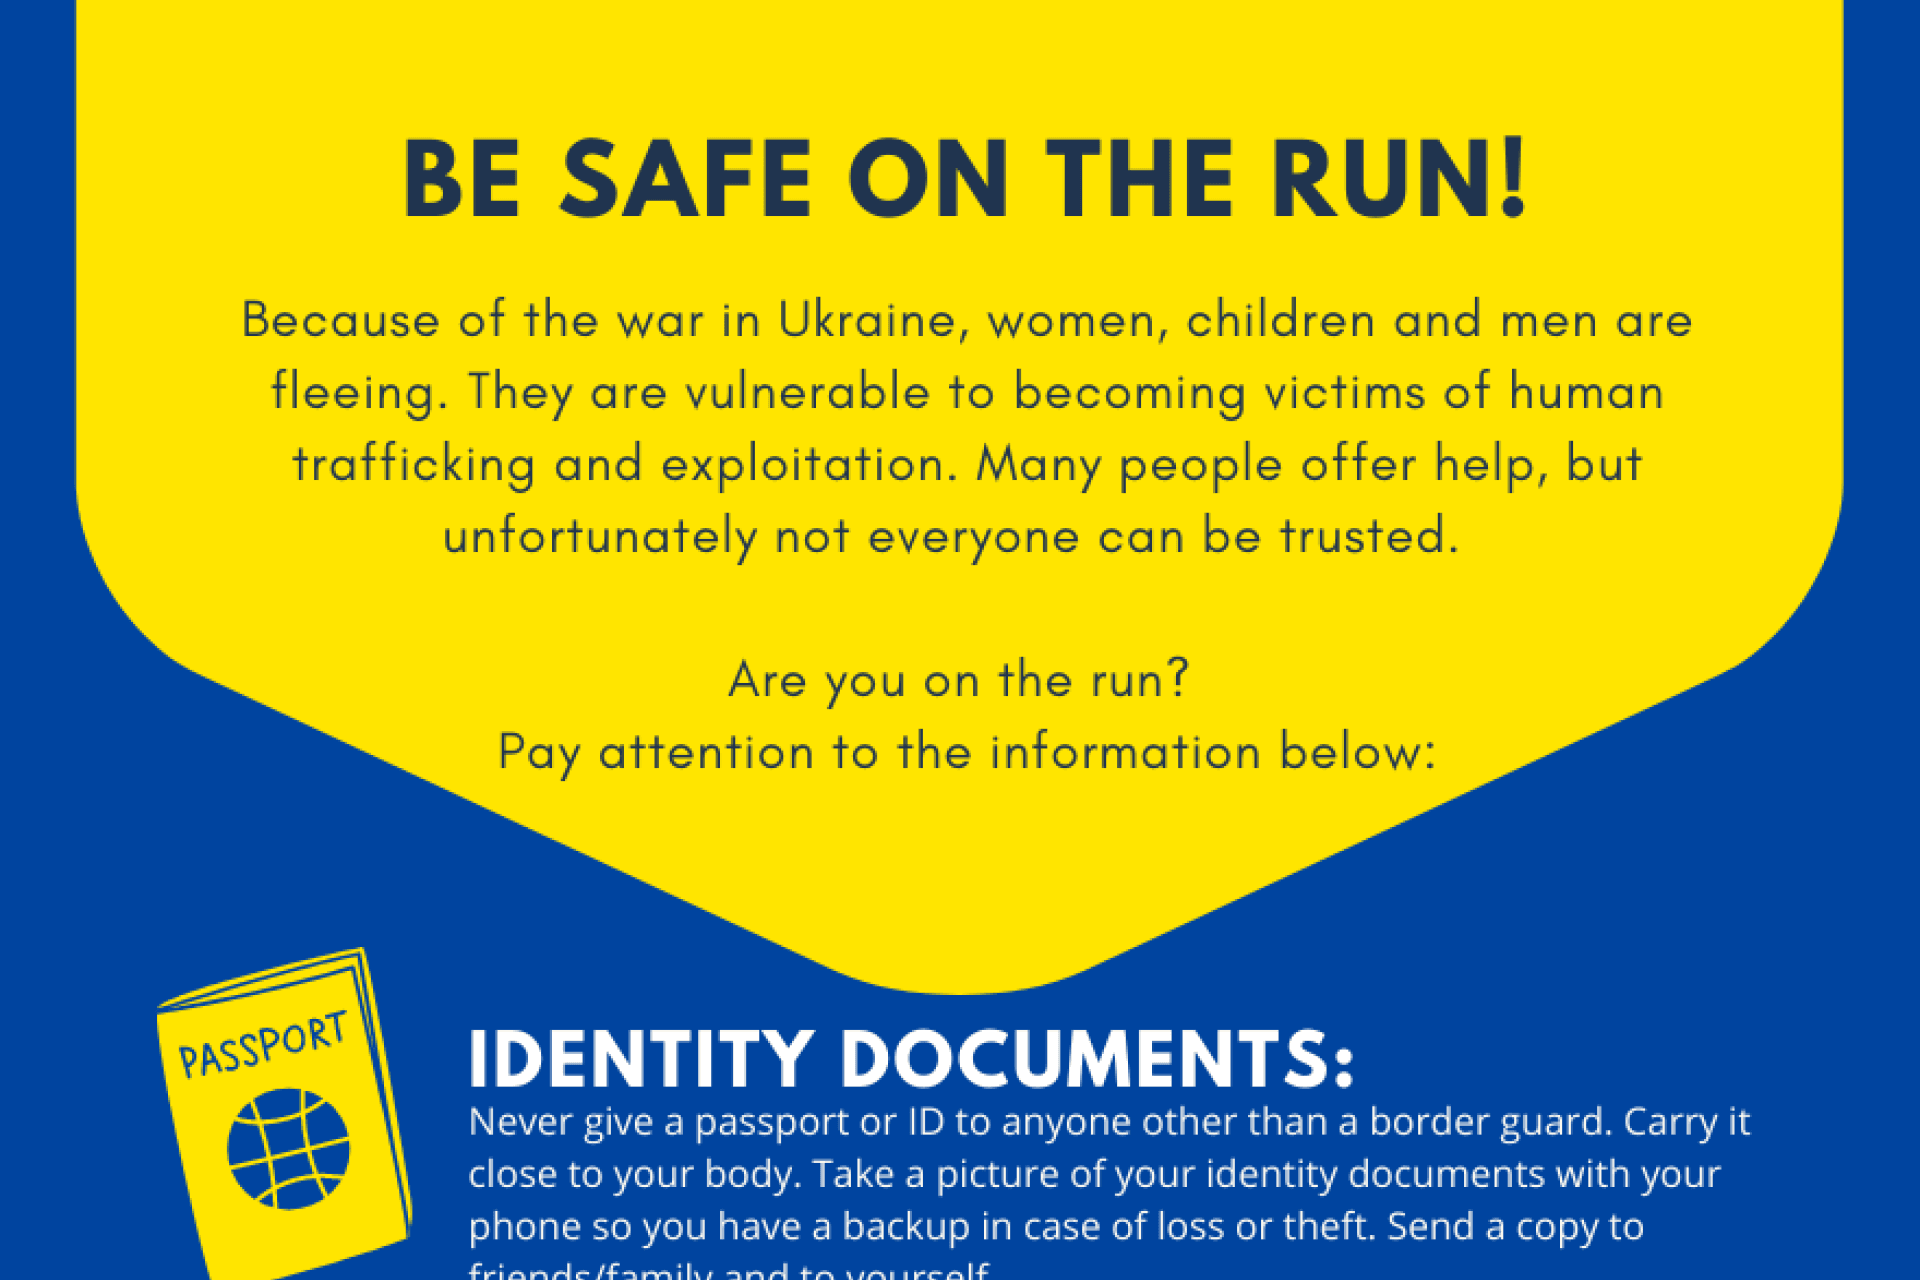 Be safe on the run